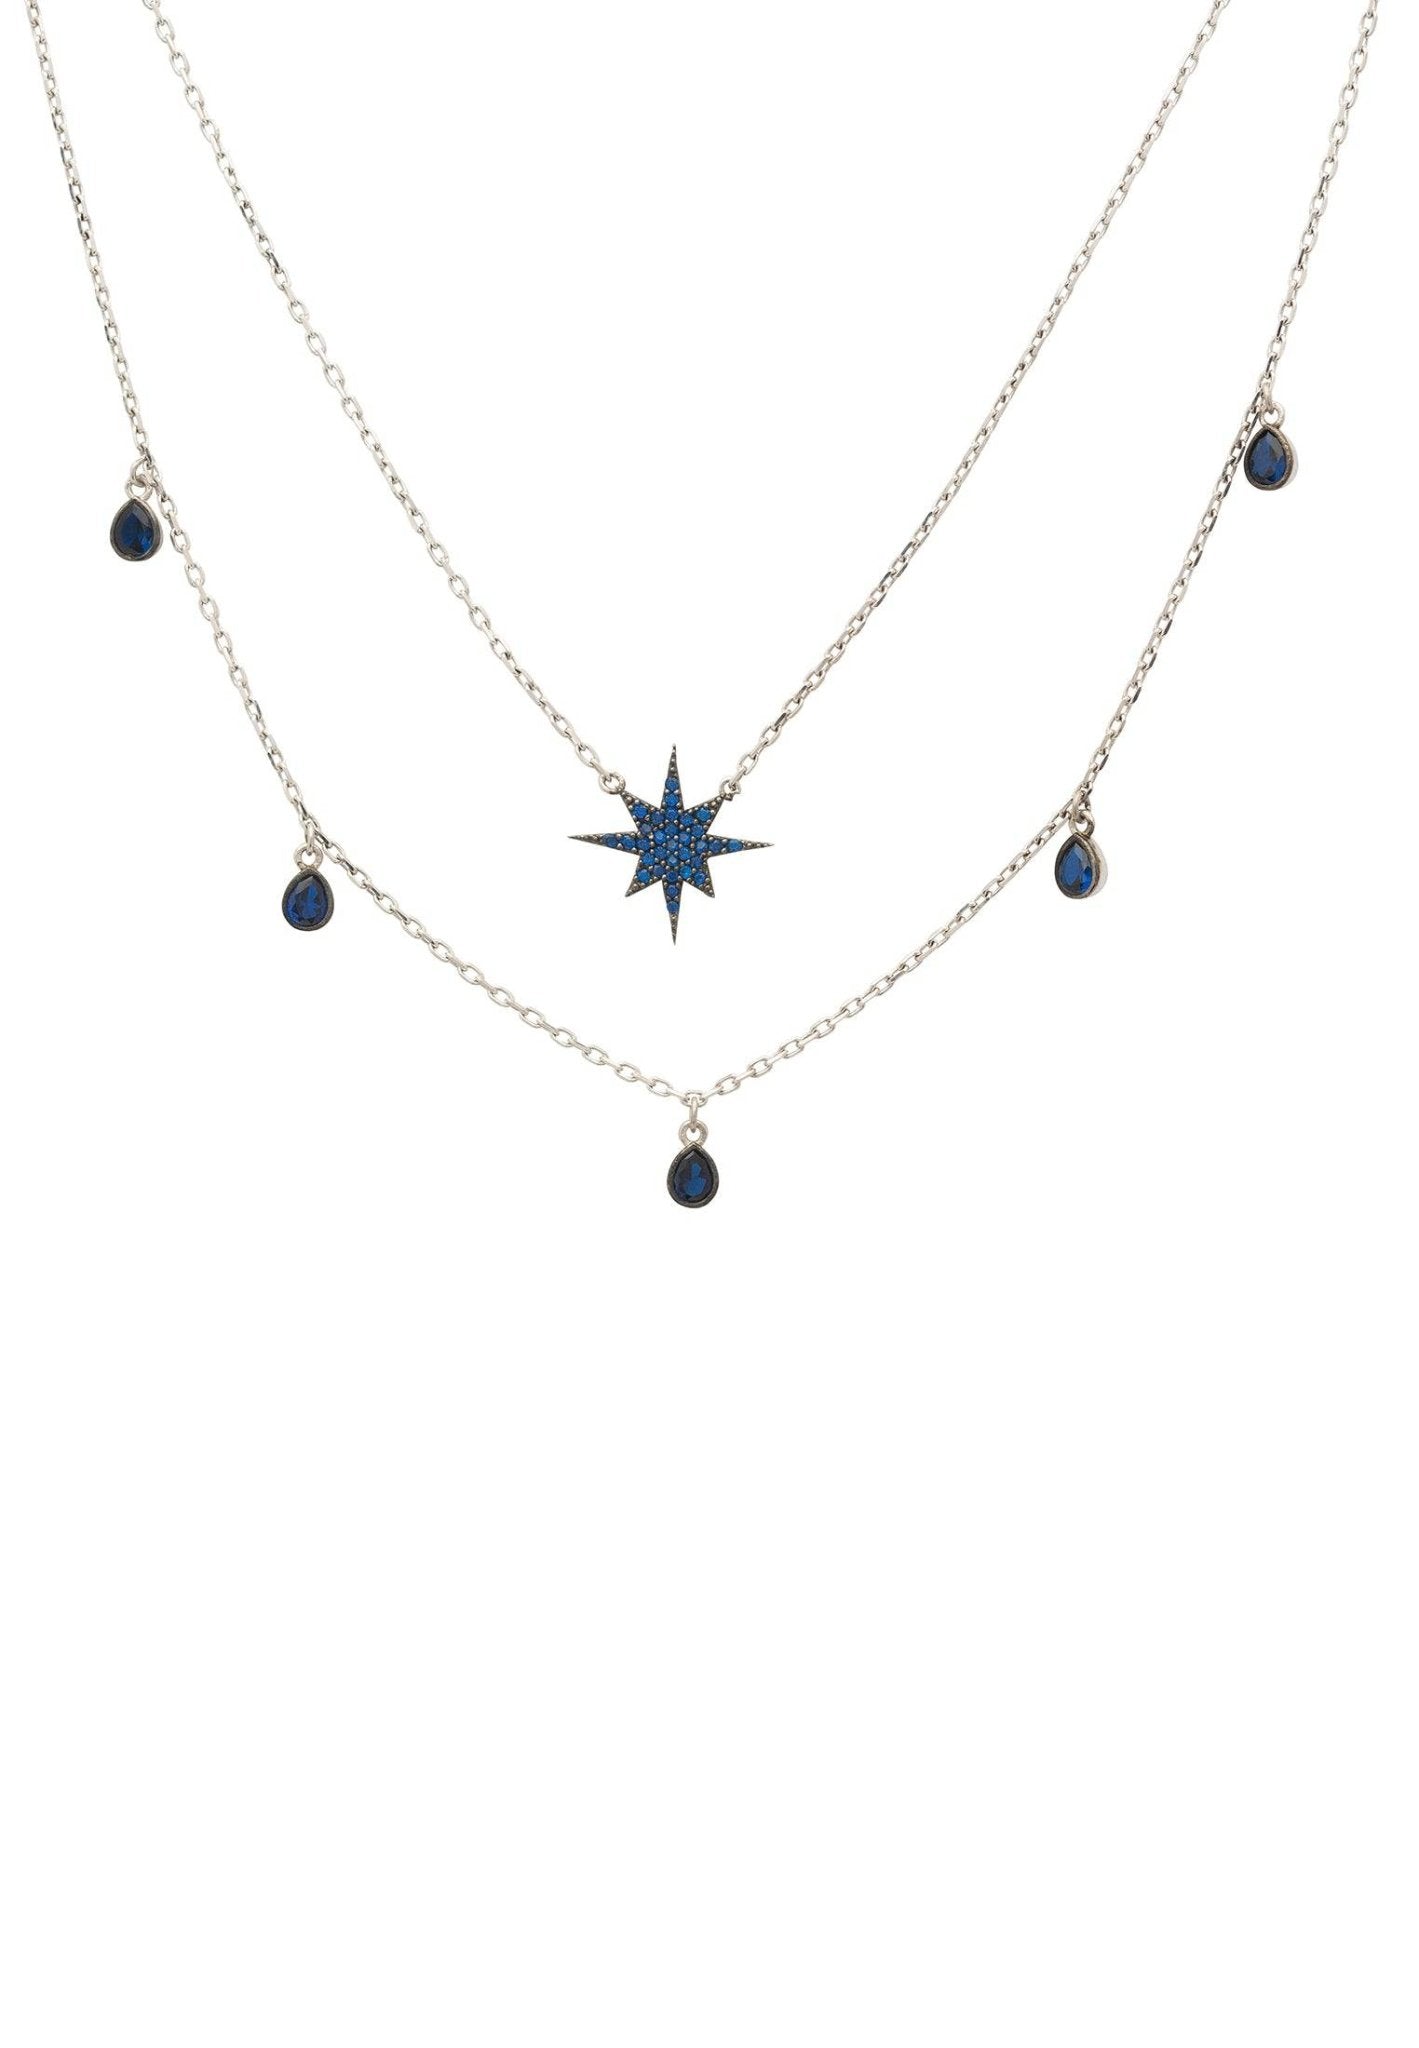 Starburst Double Strand Layered Necklace Silver Sapphire - LATELITA Necklaces